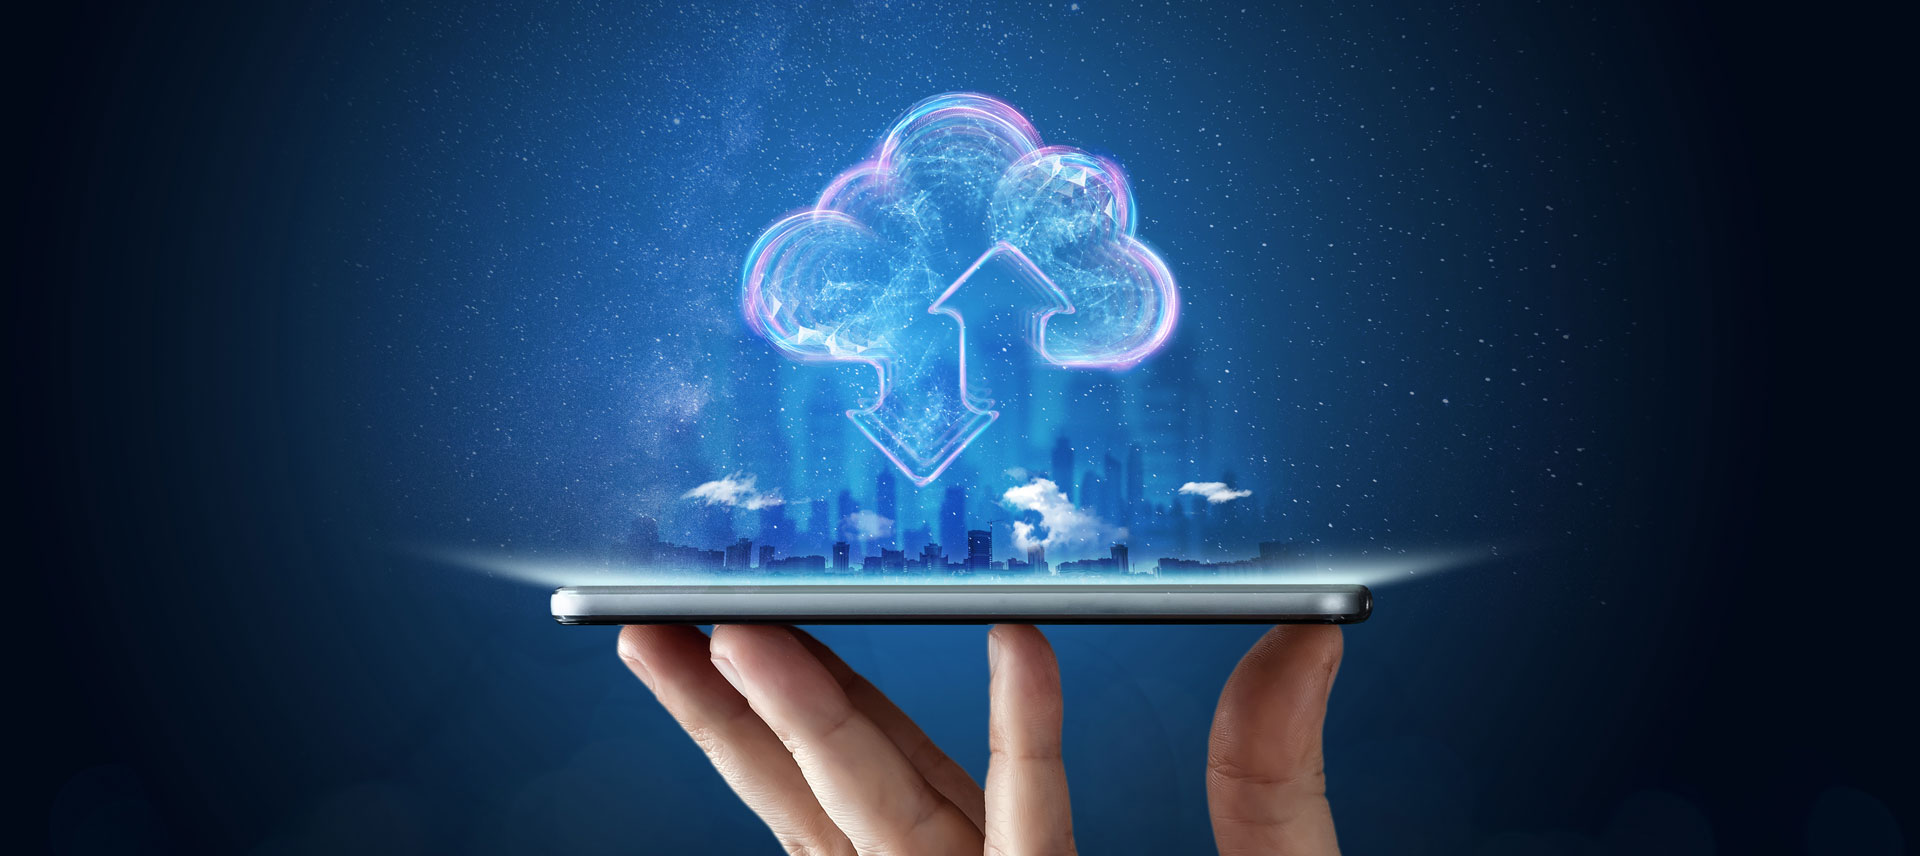 Innovative Cloud Solutions and EDiscovery